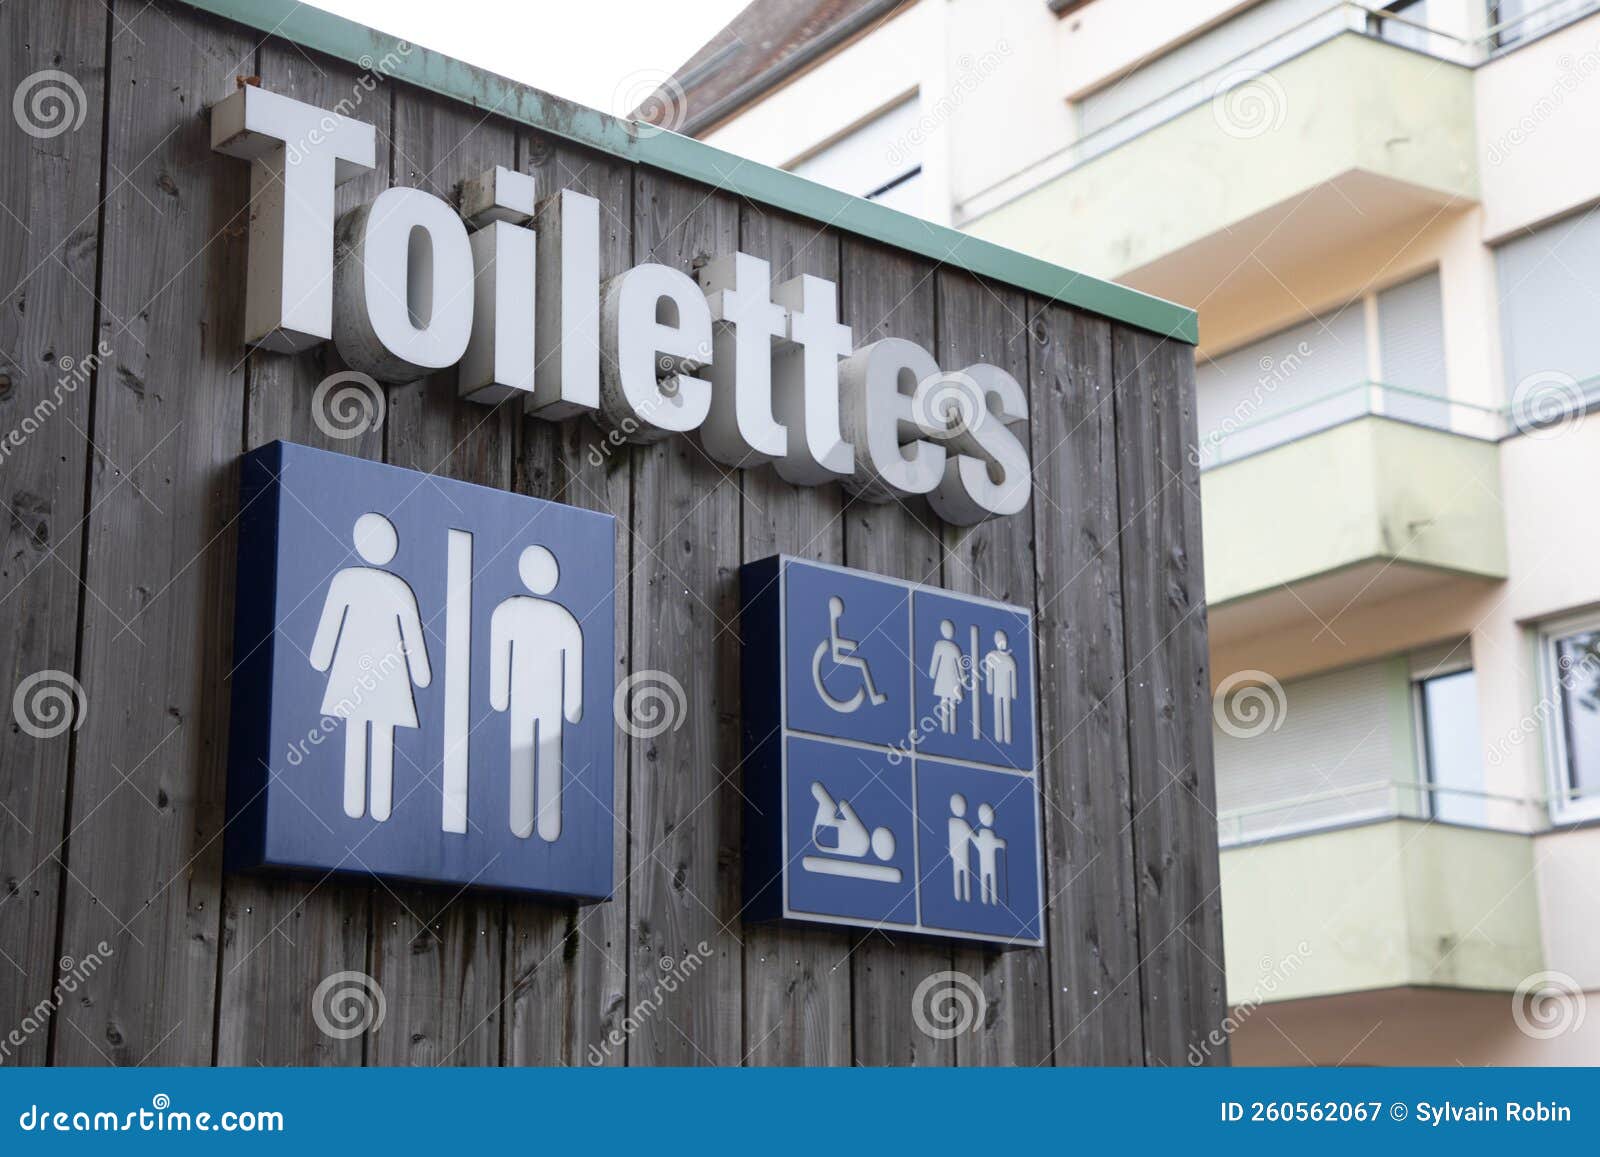 toilettes french text means wc toilet sign icon on wooden building facade water-closets wall entrance